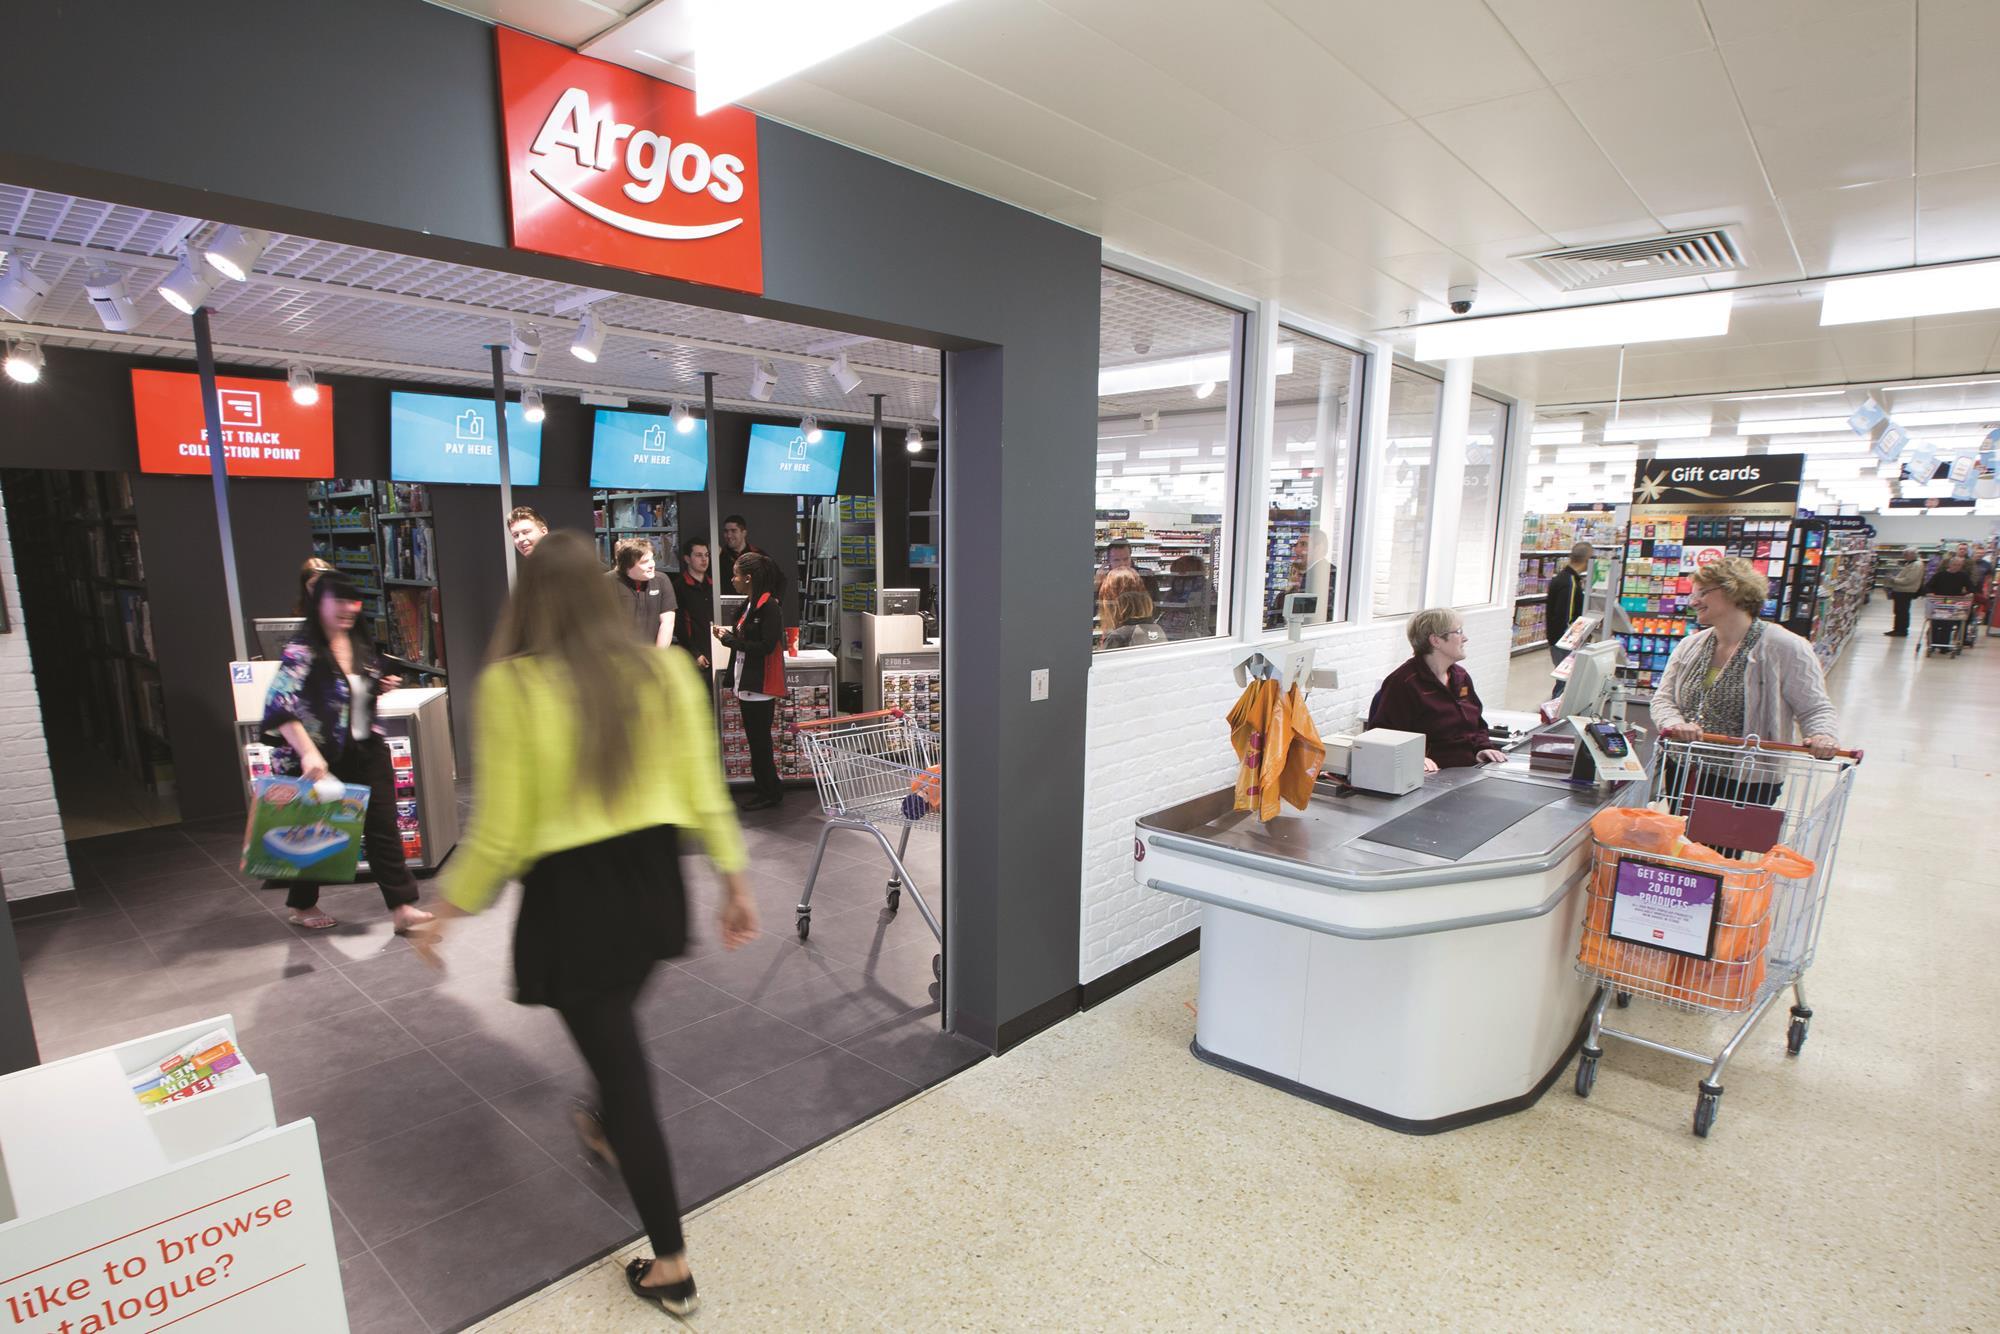 Is Argos open on Boxing Day?